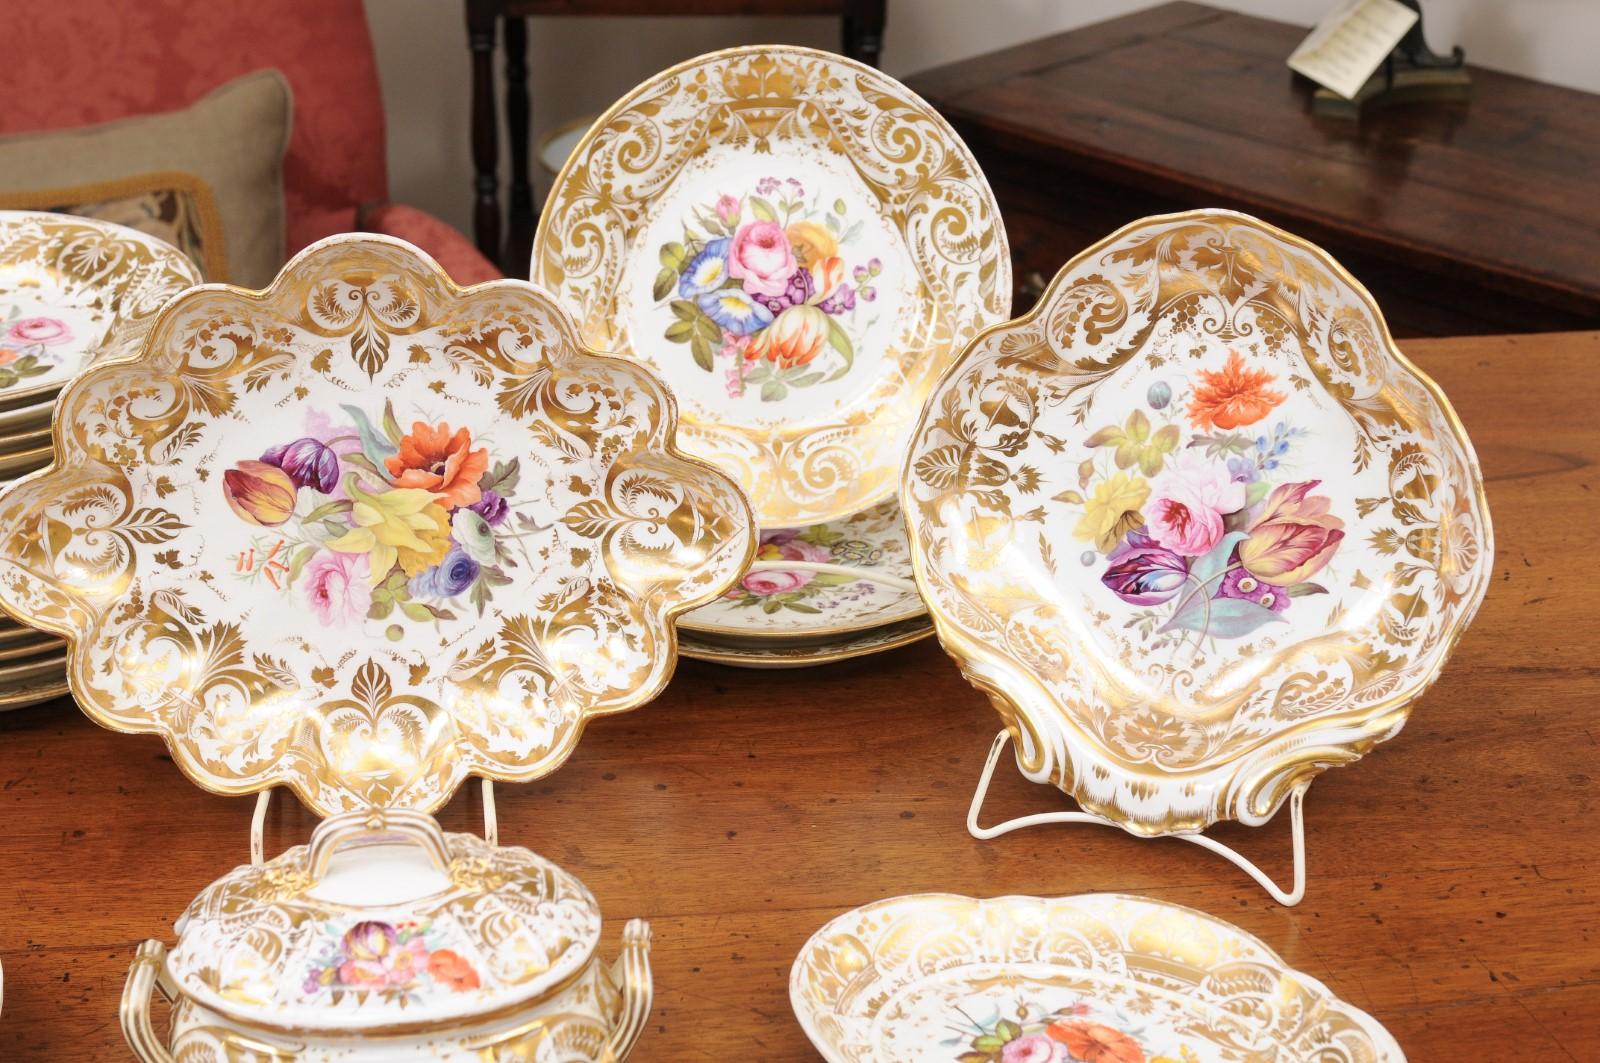 Set of Early 19th Century English Derby Porcelain Dessert Service For Sale 3